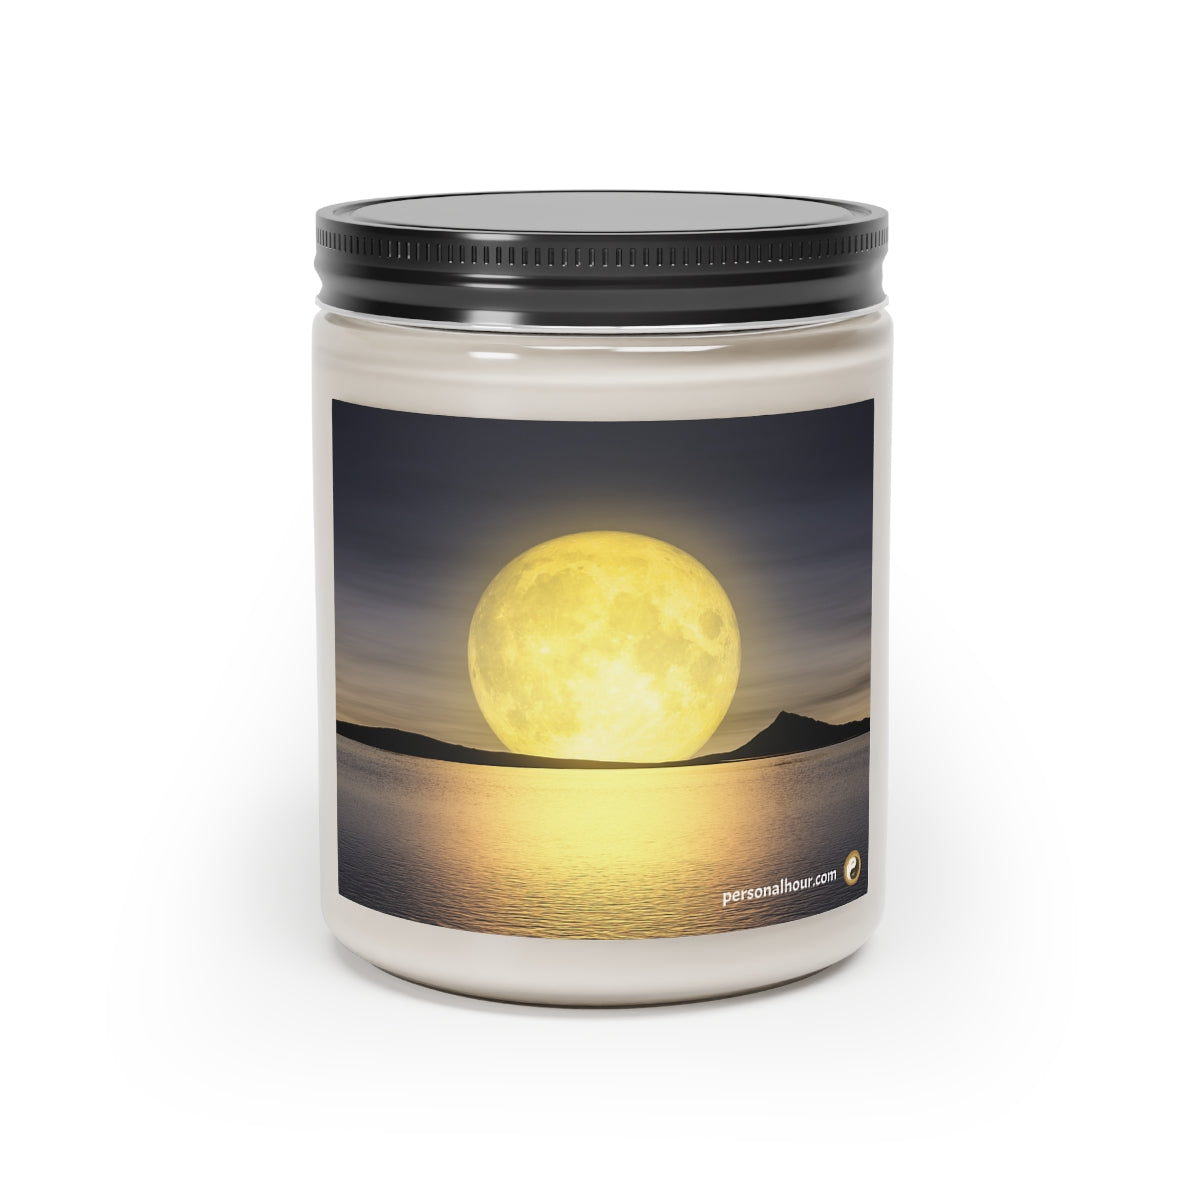 Full moon - Scented Candle, 9oz - Personal Hour for Yoga and Meditations 